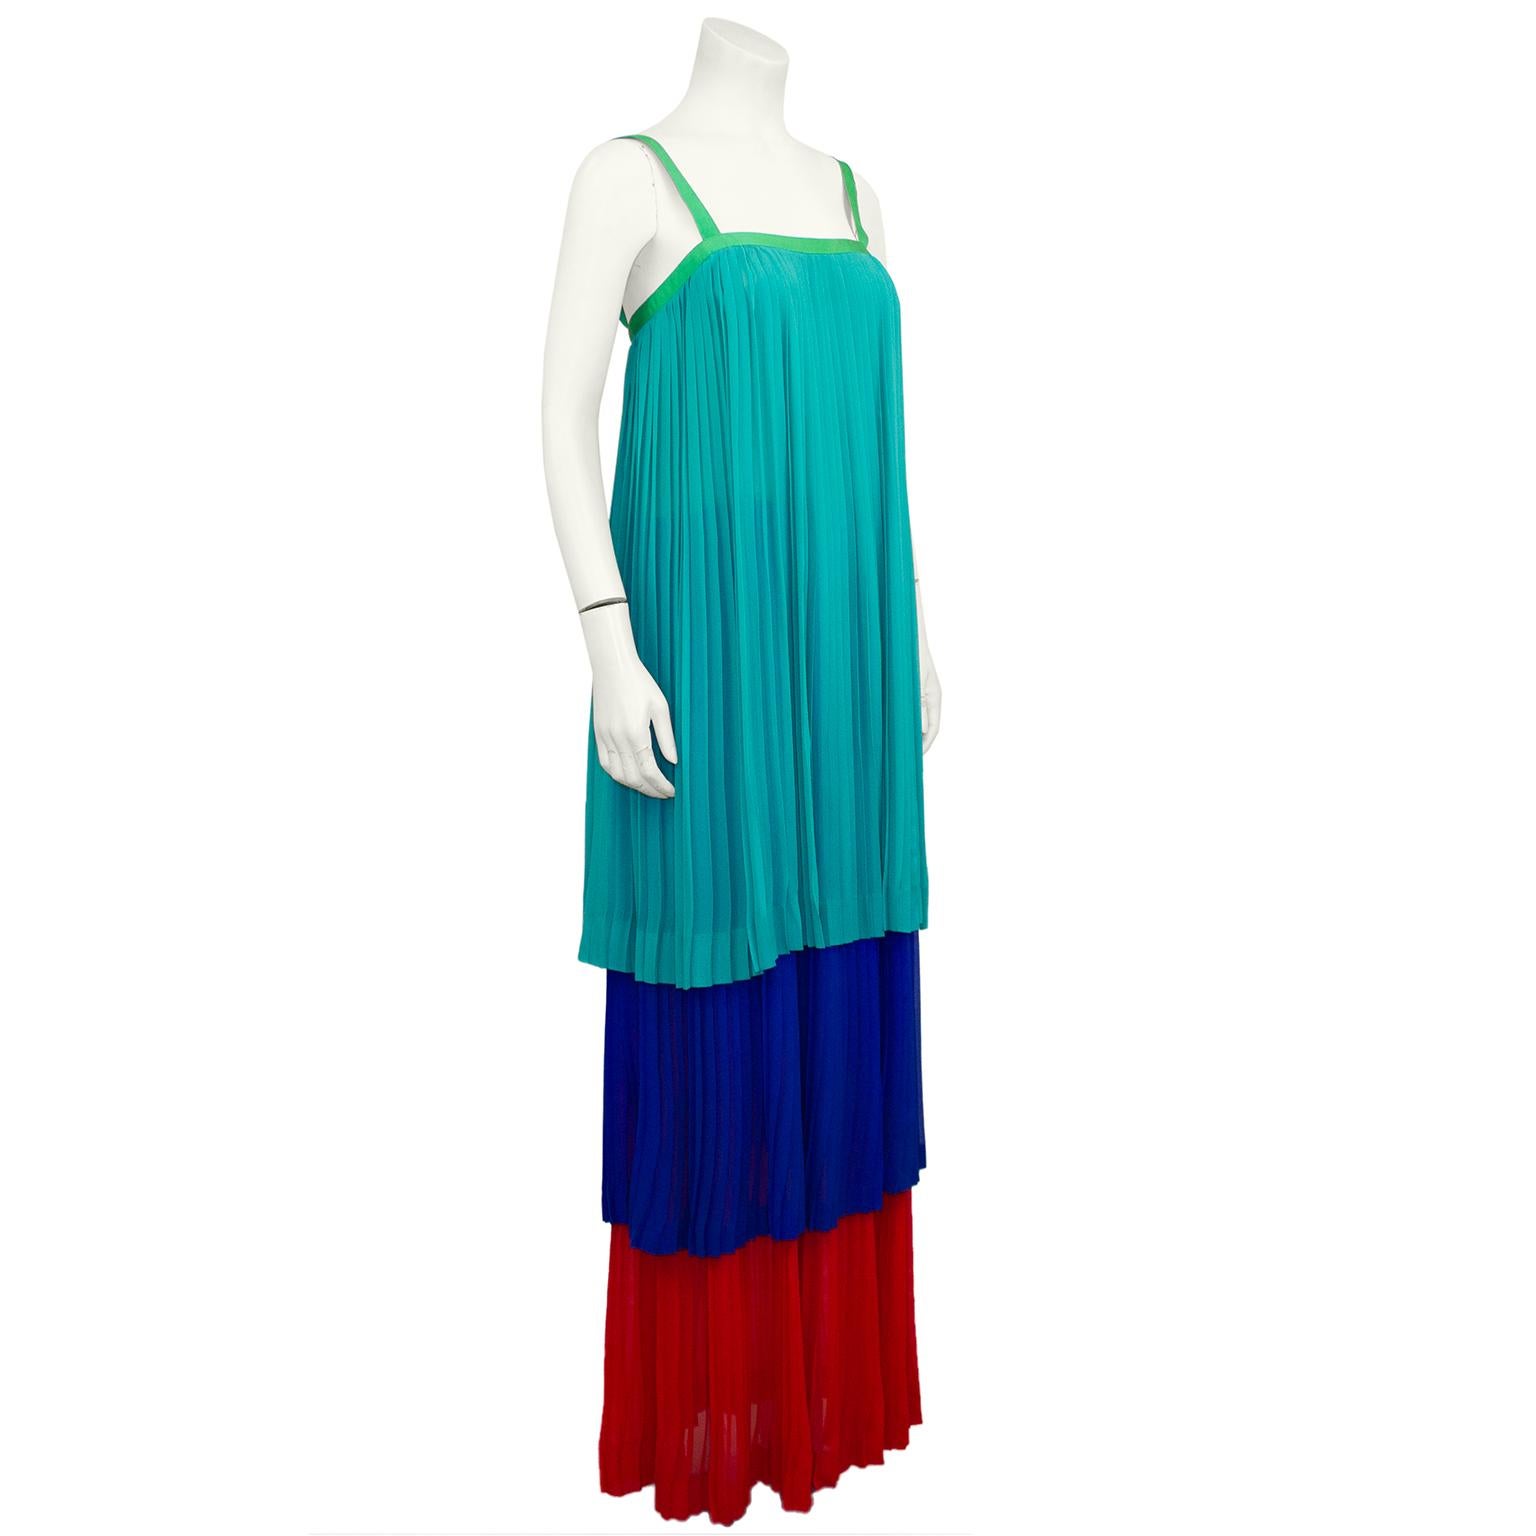 Yves Saint Laurent Rive Gauche label pleated chiffon gown from the “High Seas Chic” RTW Spring 1978 collection. The tricolour chiffon tiers are pleated with the first layer draping from the bust to the mid hip, second falling to the mid calf and the